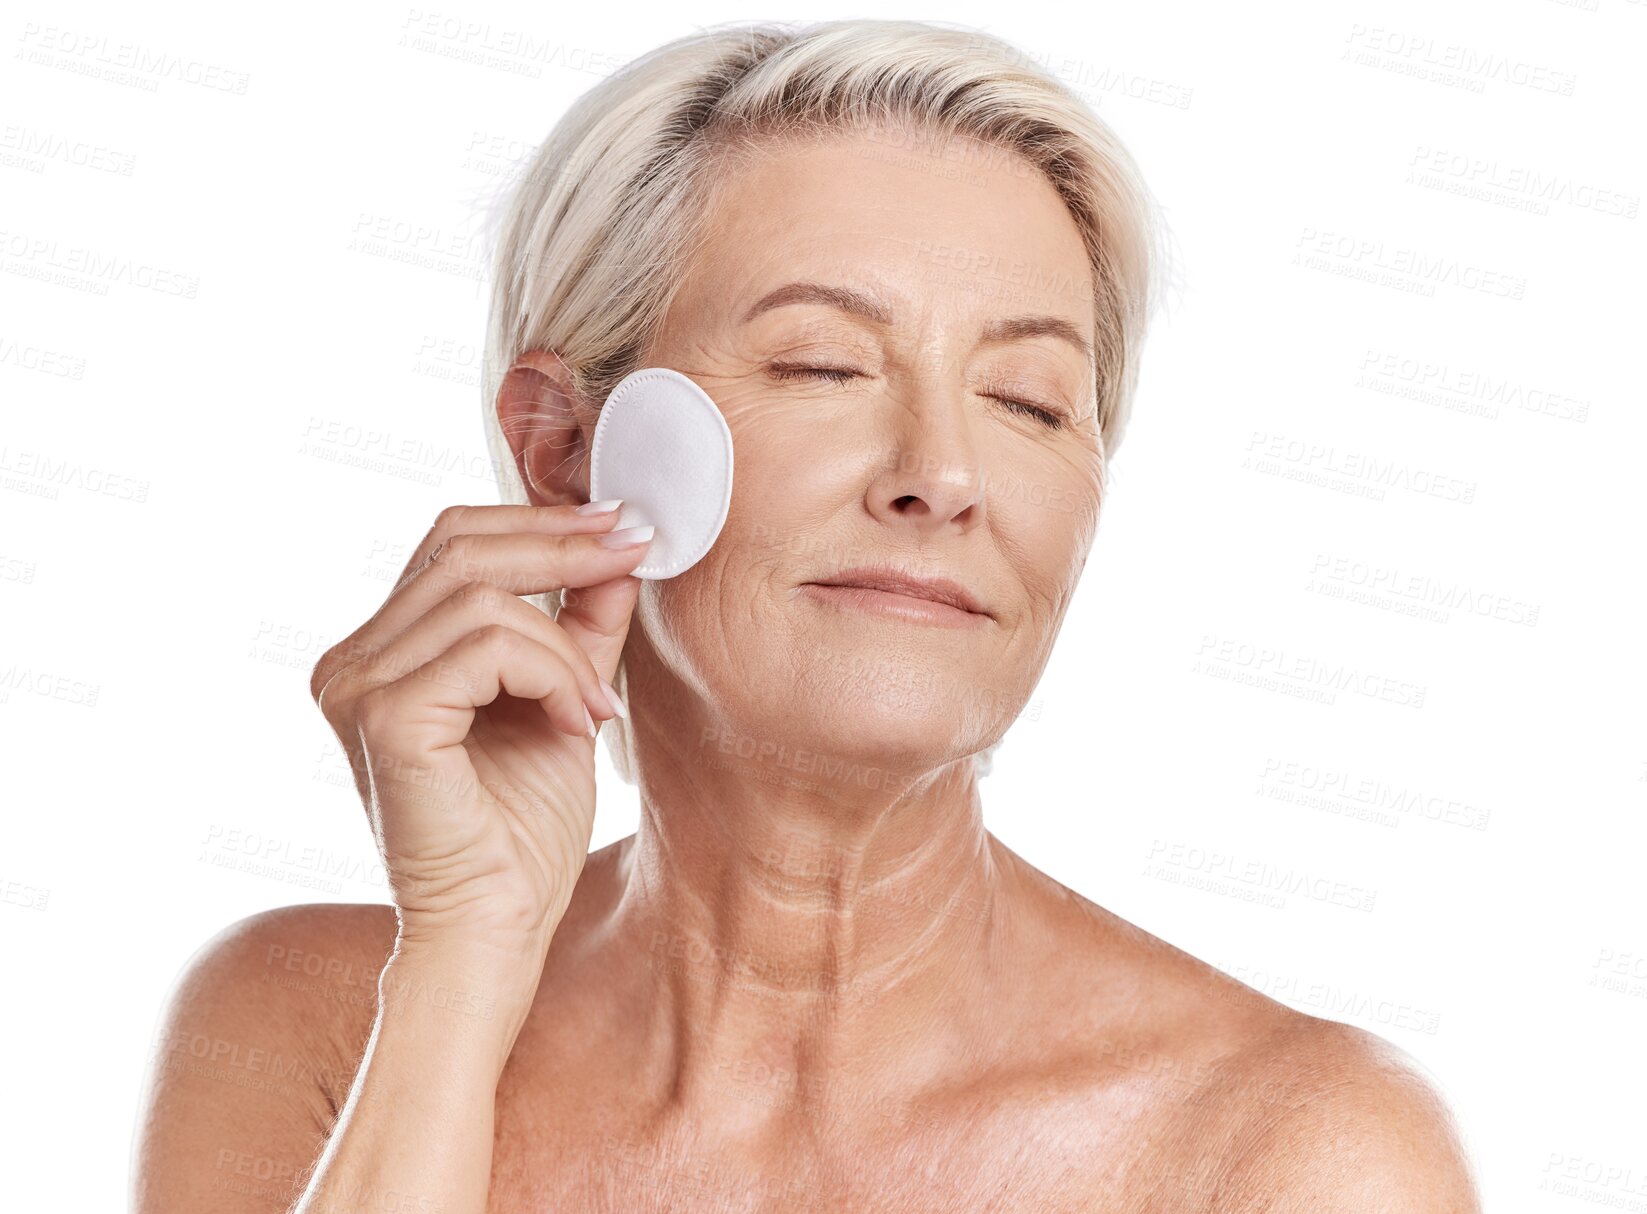 Buy stock photo Senior woman, cotton pad and cleaning face in makeup removal isolated on a transparent PNG background. Happy elderly female person relax for clean hygiene, dermatology or skincare of facial beauty